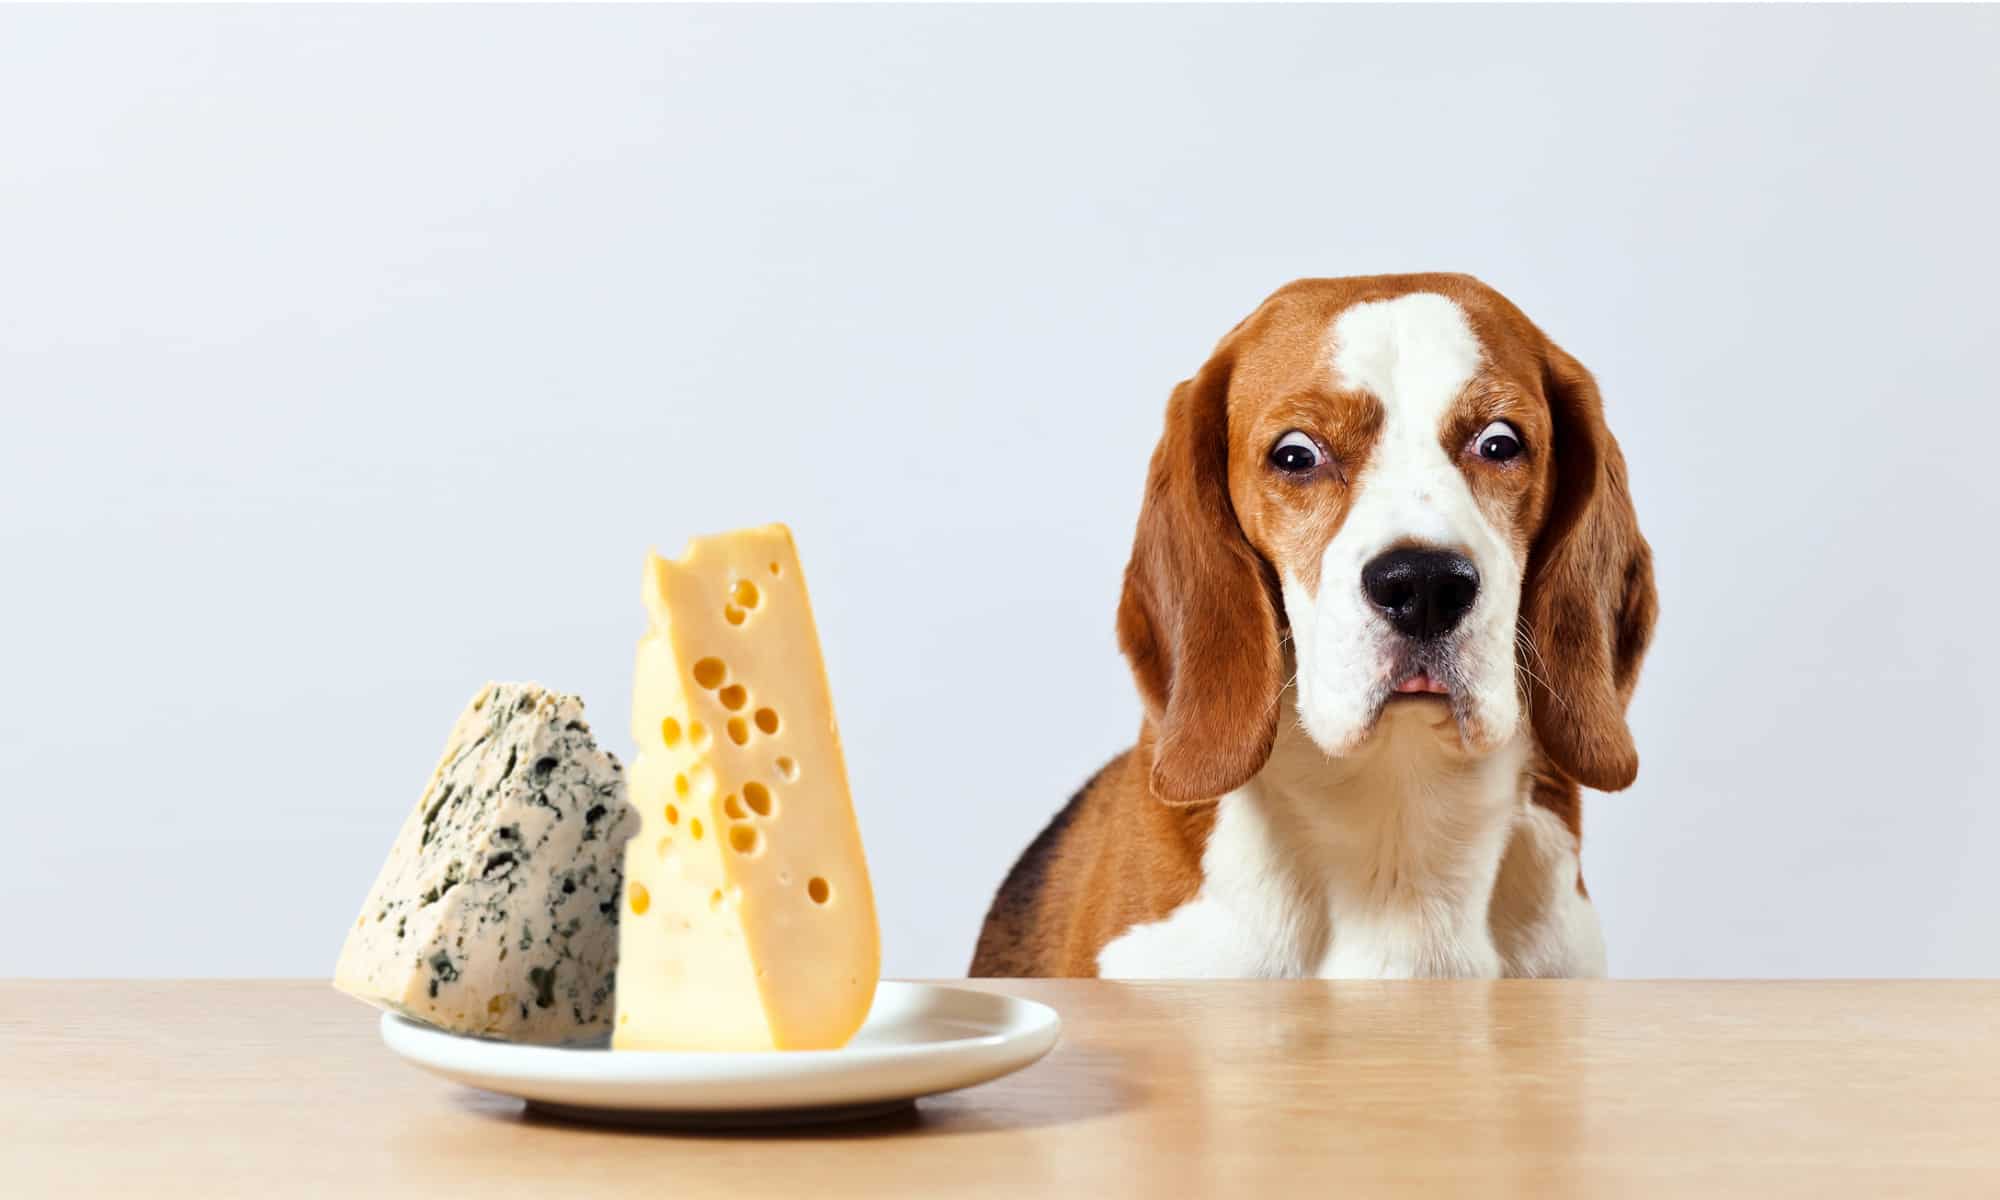 Beagle eying a plate of cheese